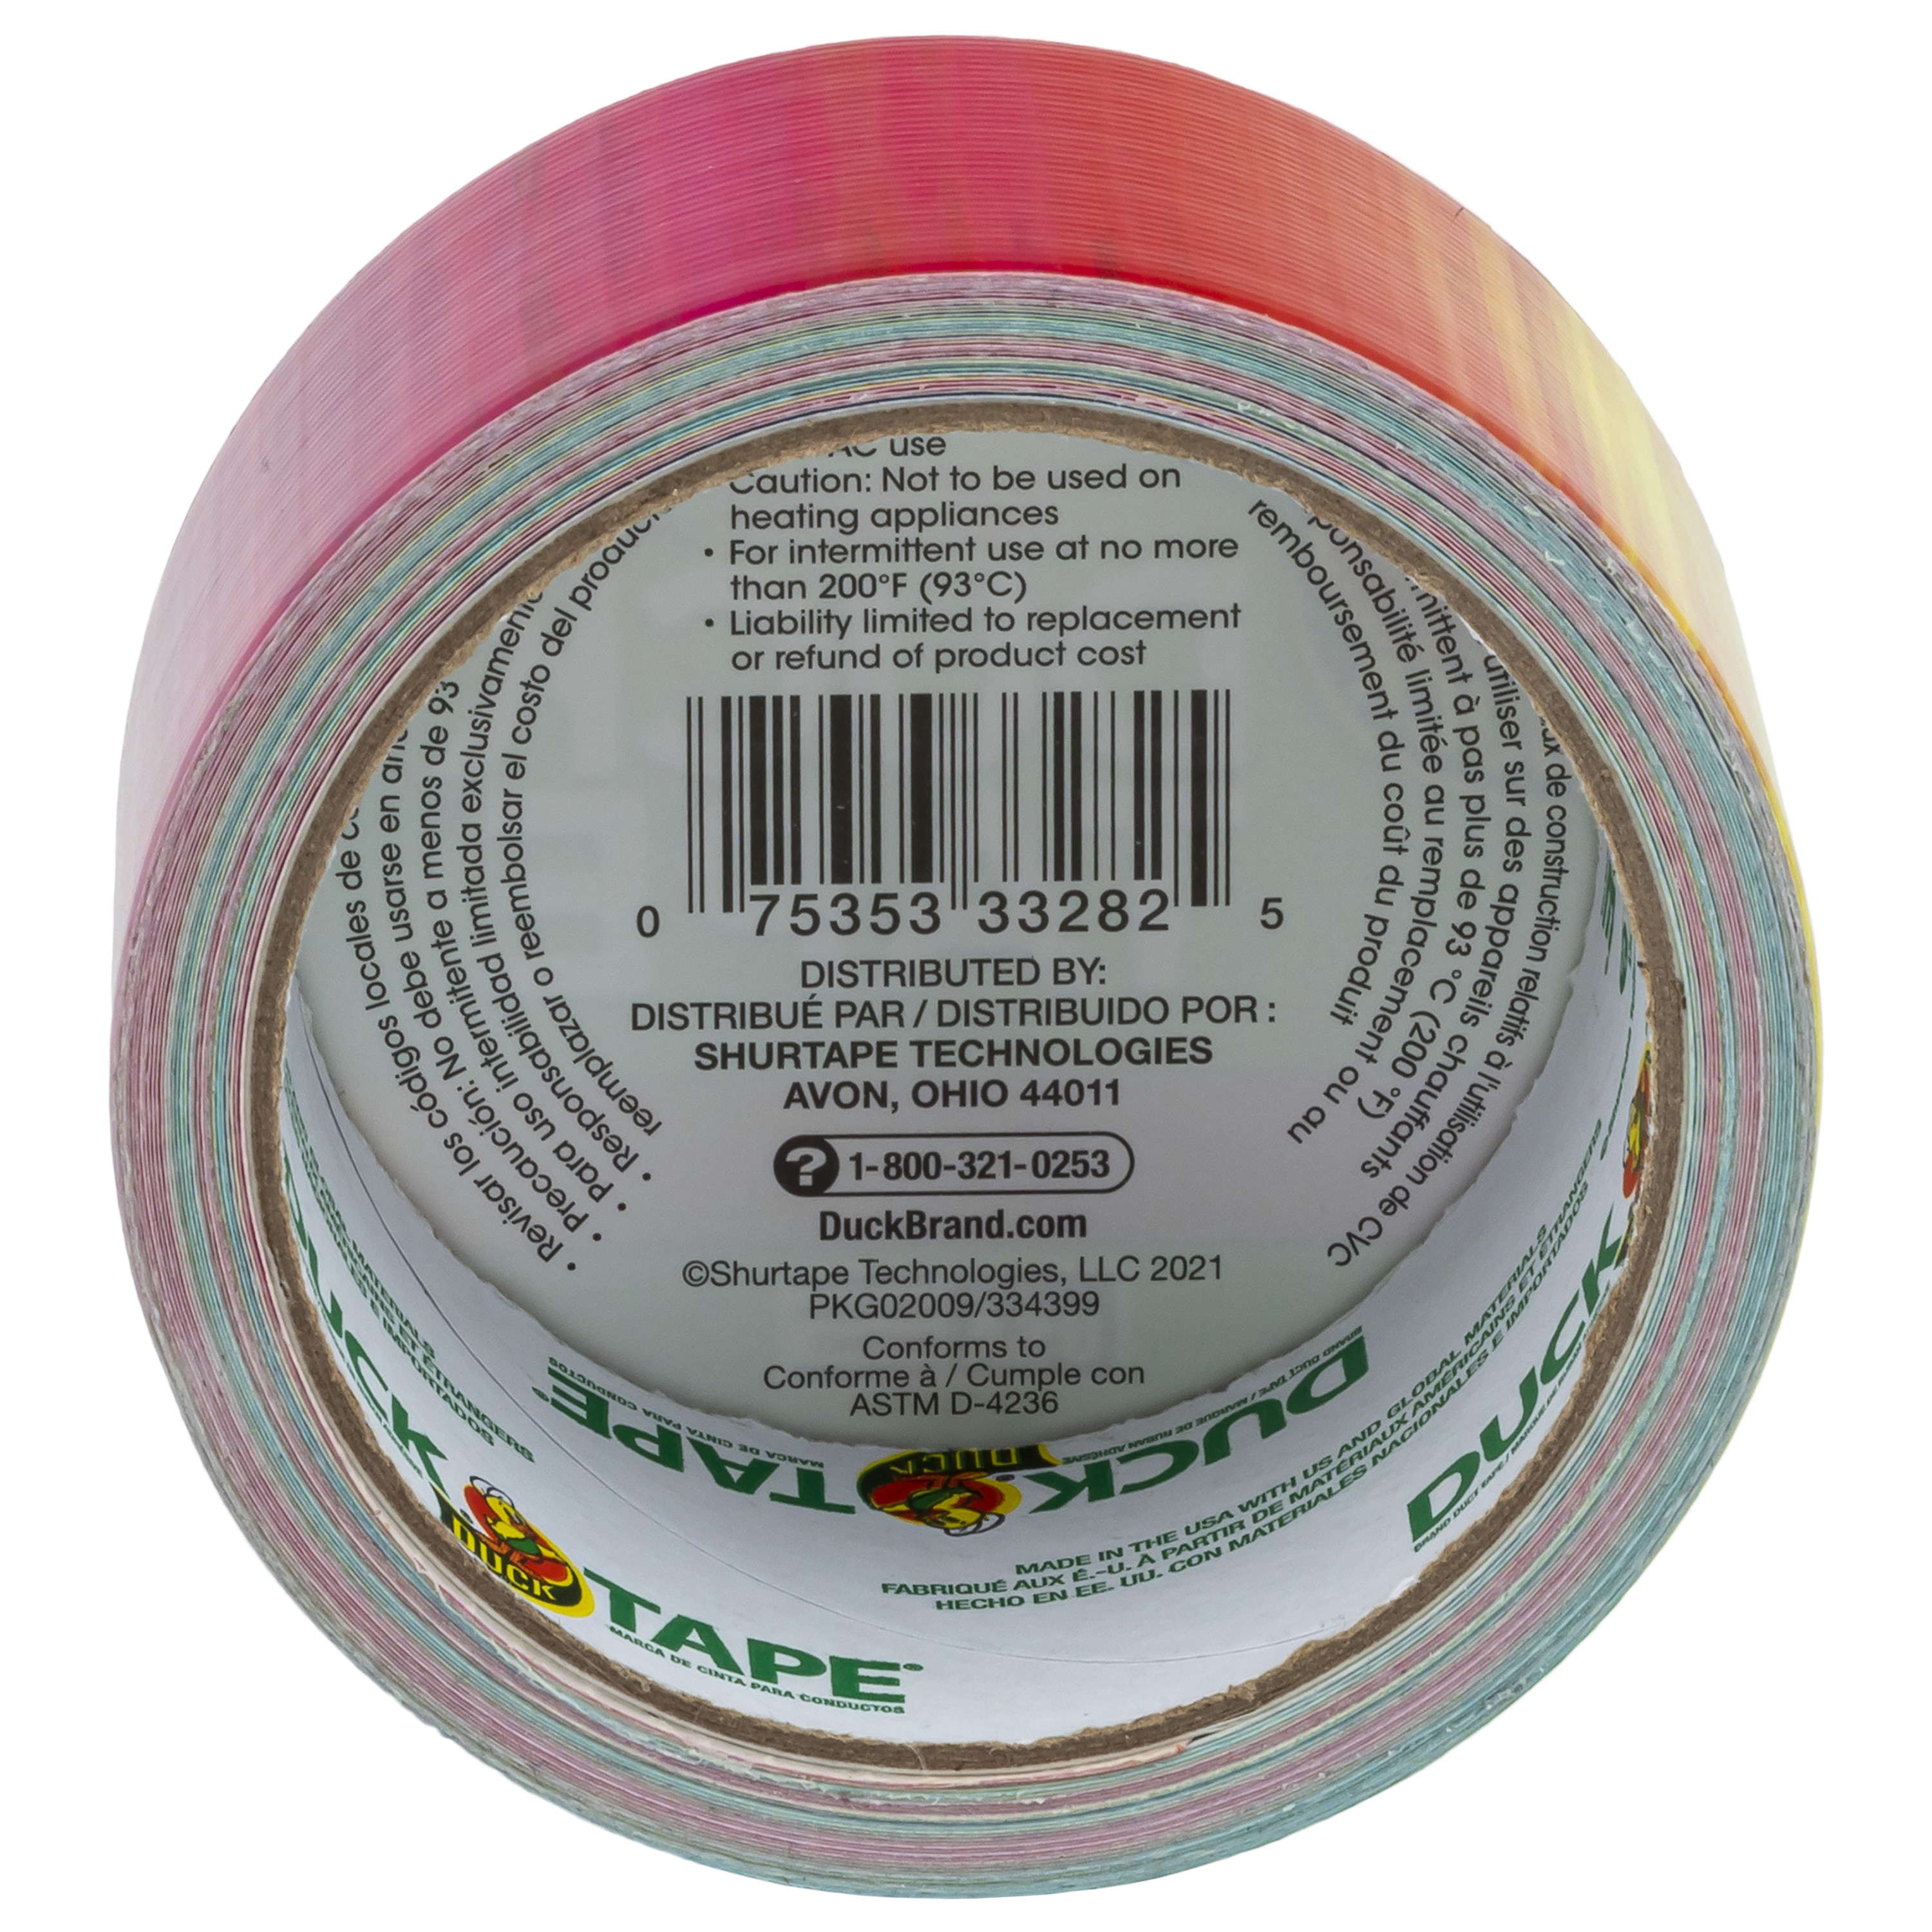 Printed Duck Tape Brand Duct Tape - Ombre Rainbow 10 Yards - image 4 of 8